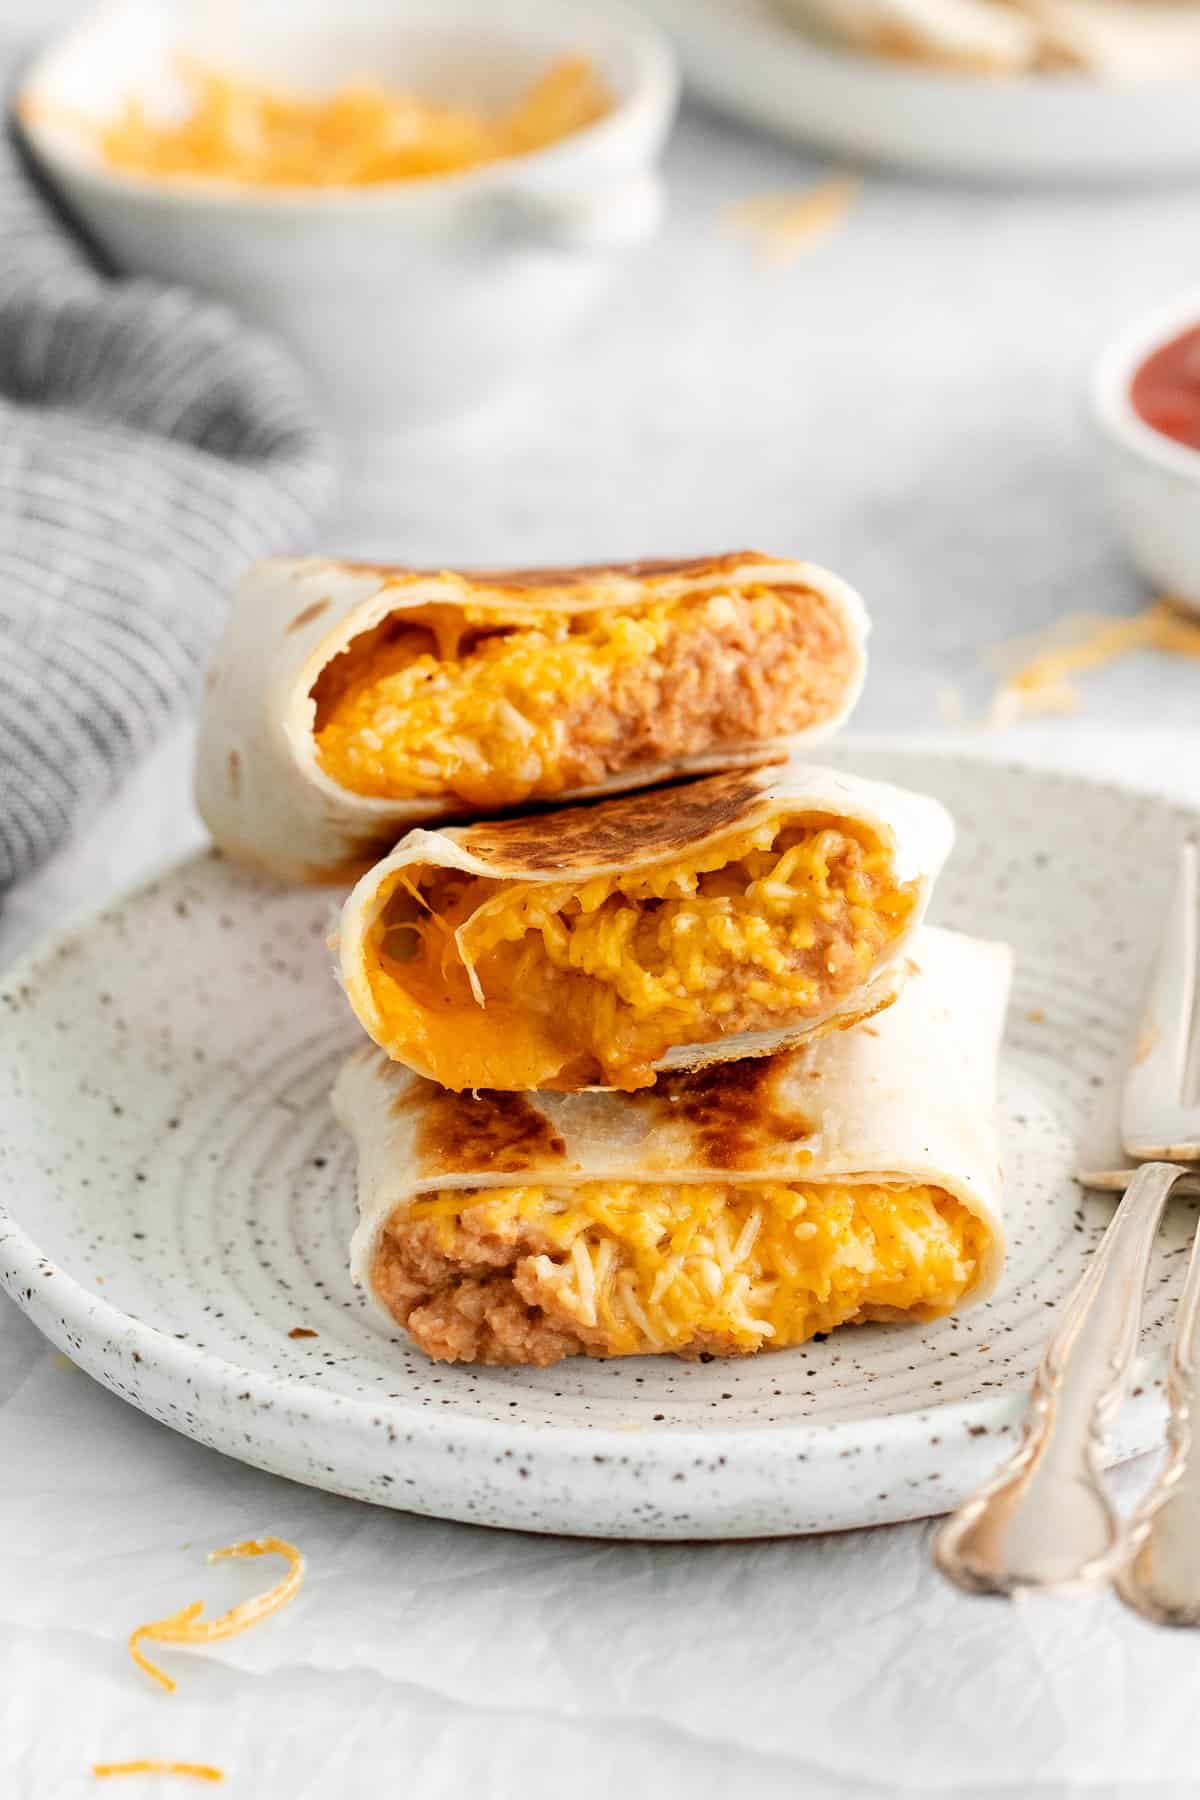 Bean and cheese burrito on a plate.